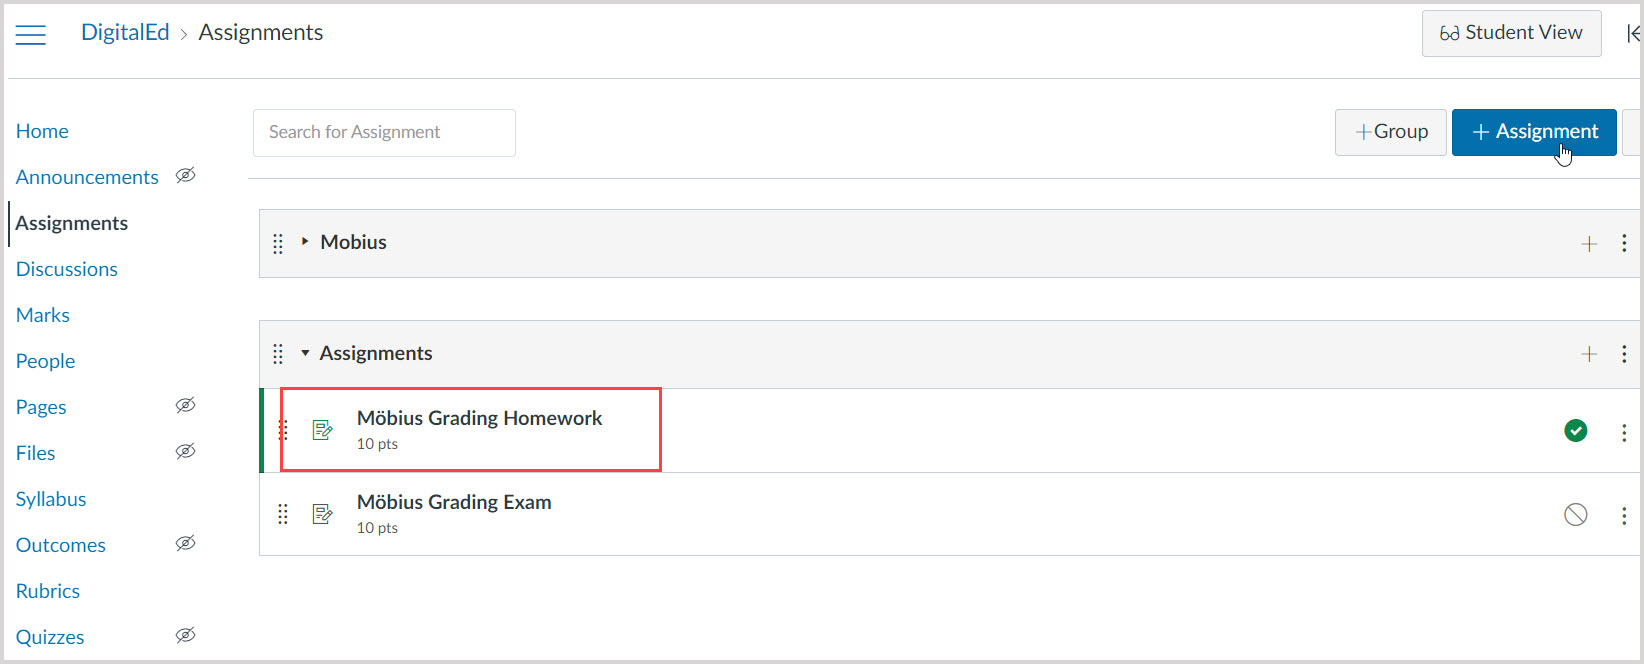 Canvas Assignments page with a link called Mobius Grading Homework.